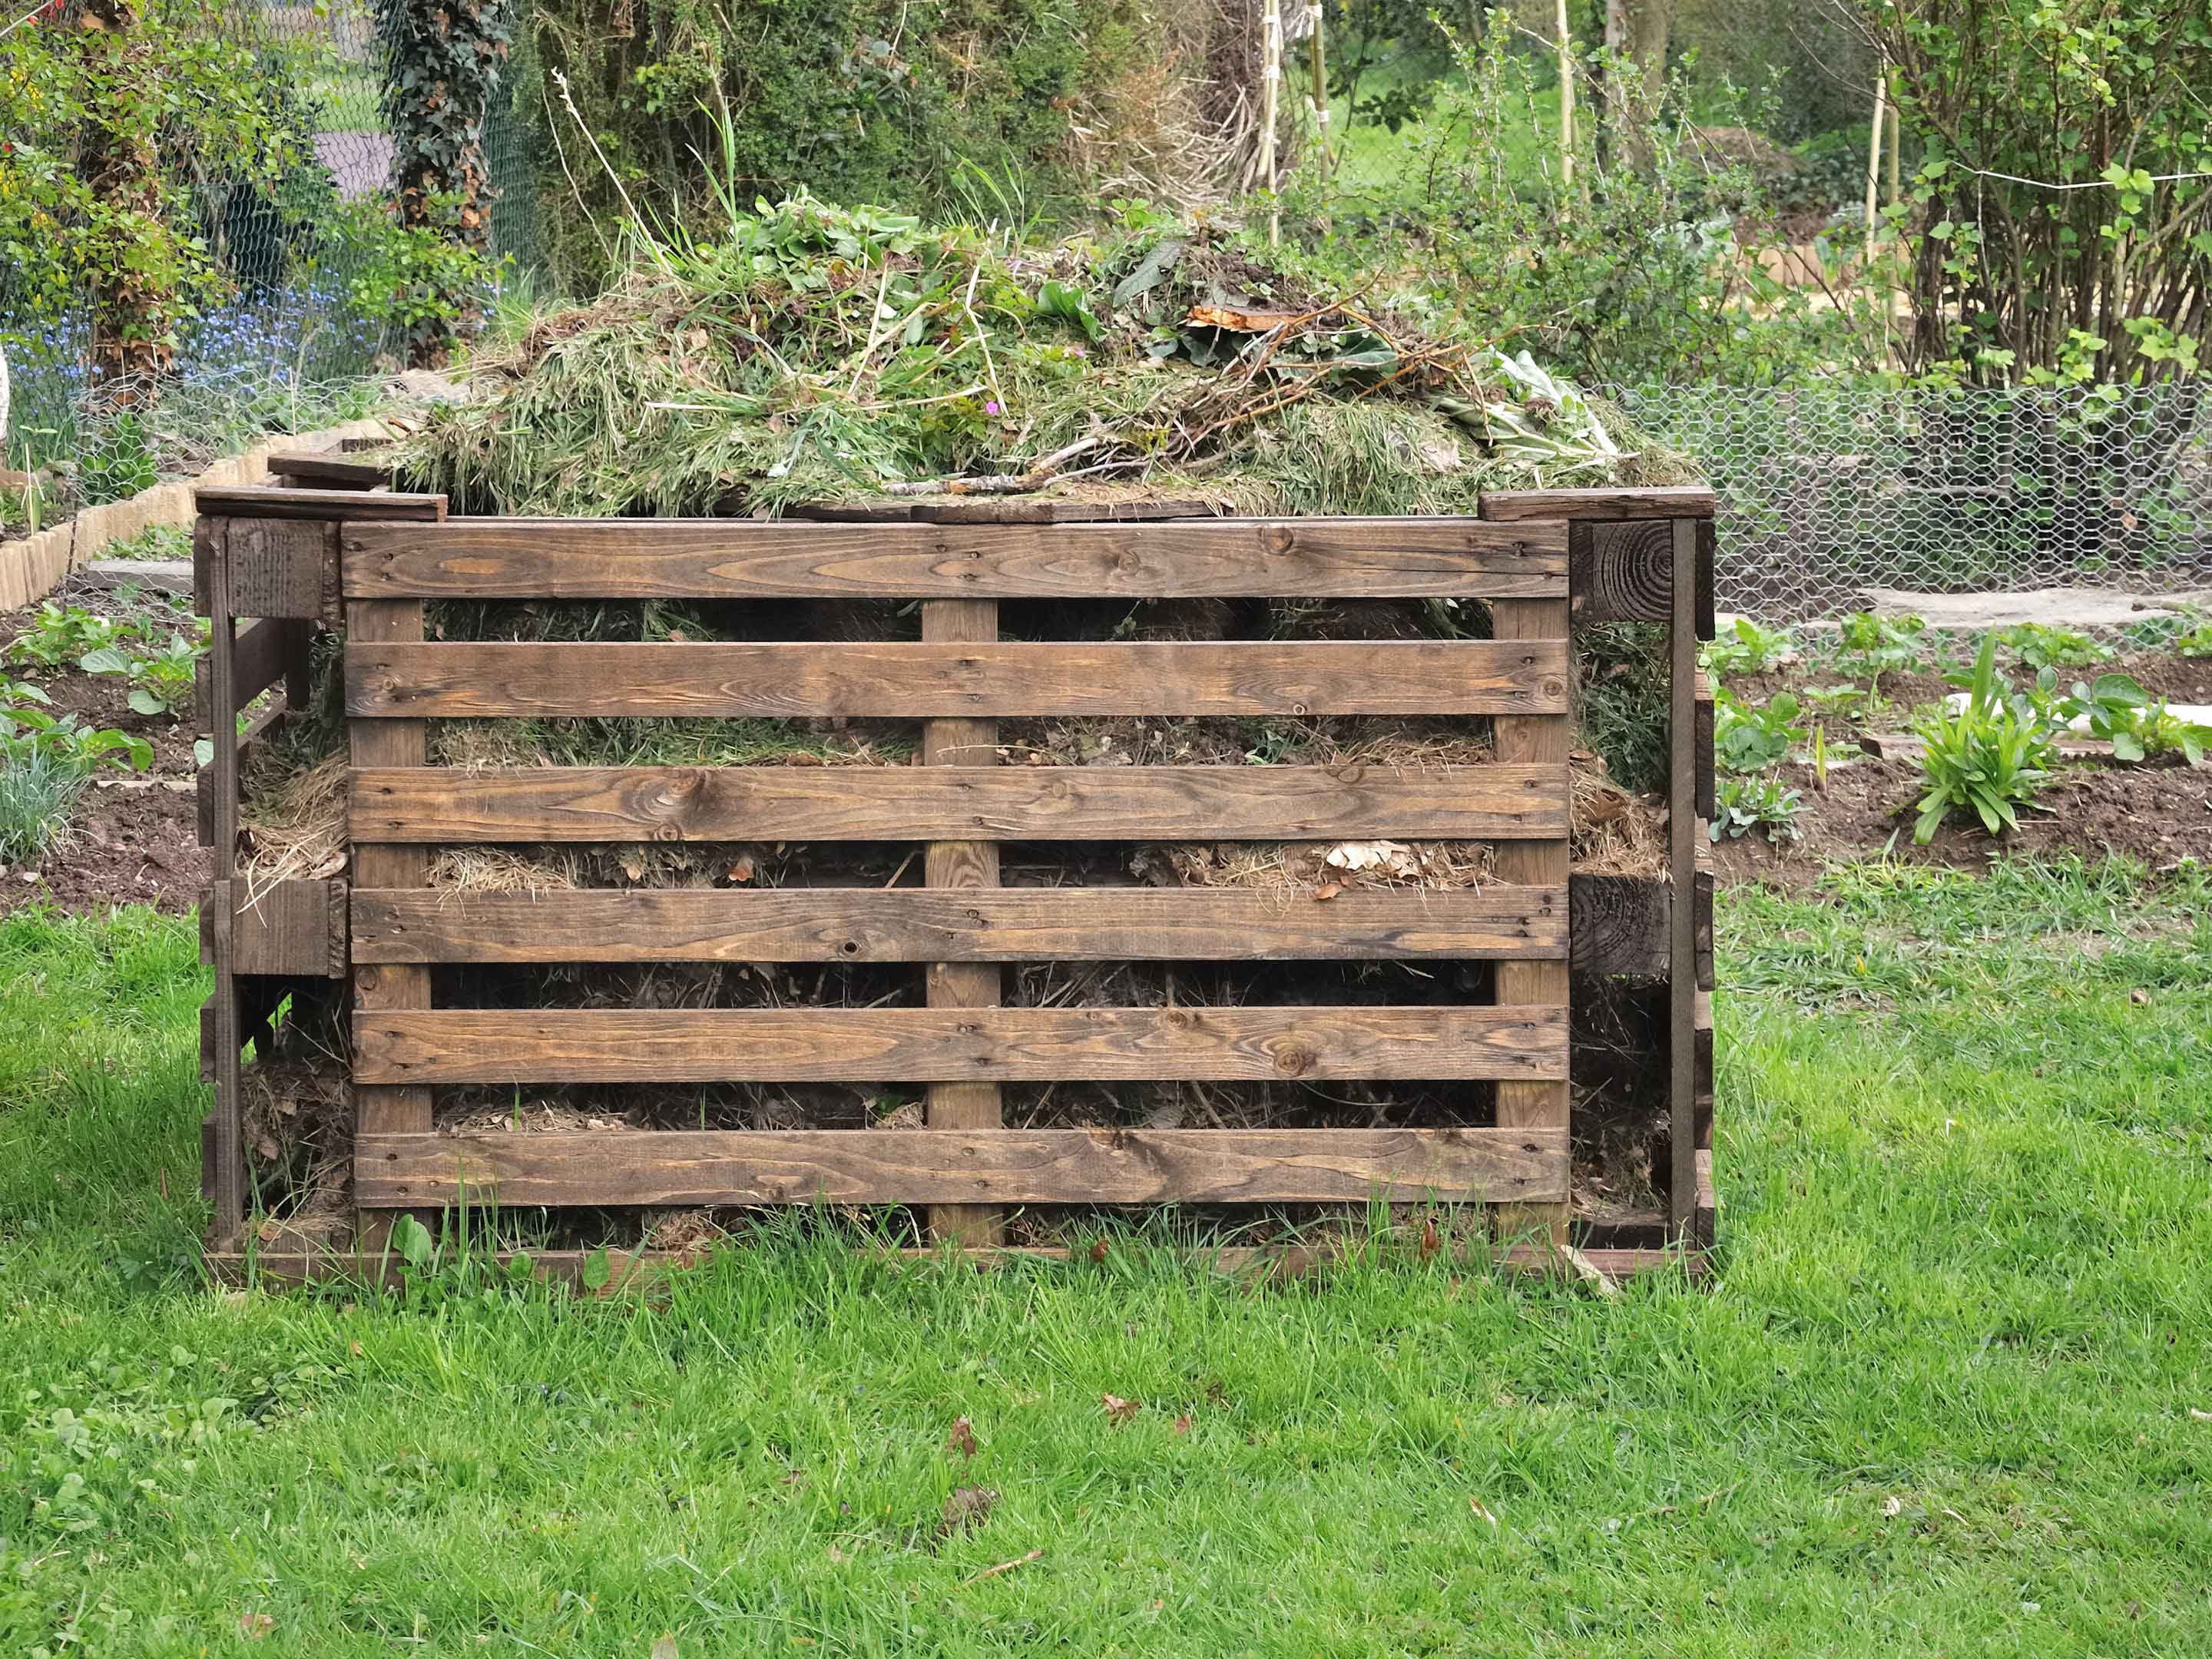 What you should bear in mind when making a compost heap